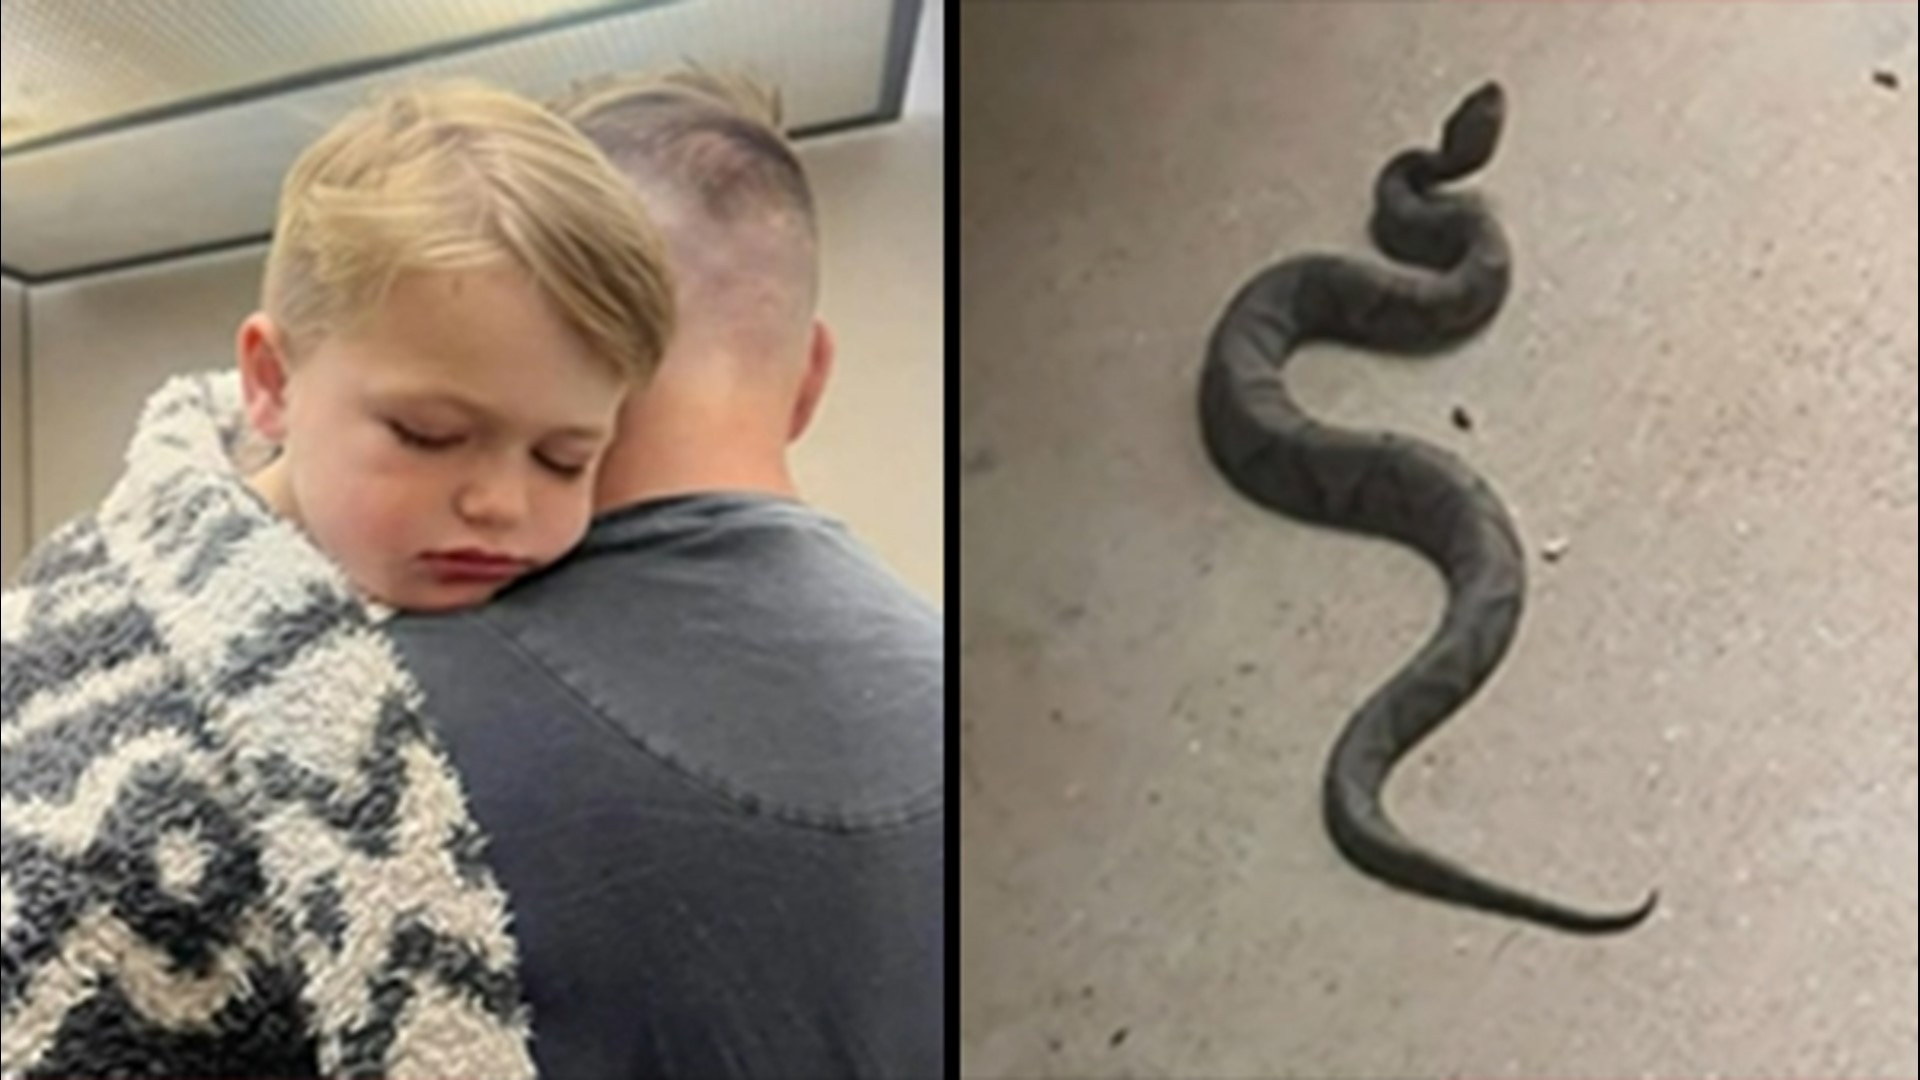 Jad Pollom was bitten by a venomous copperhead while camping with his family in North Carolina. Experts say his parents did the right thing after the bite.